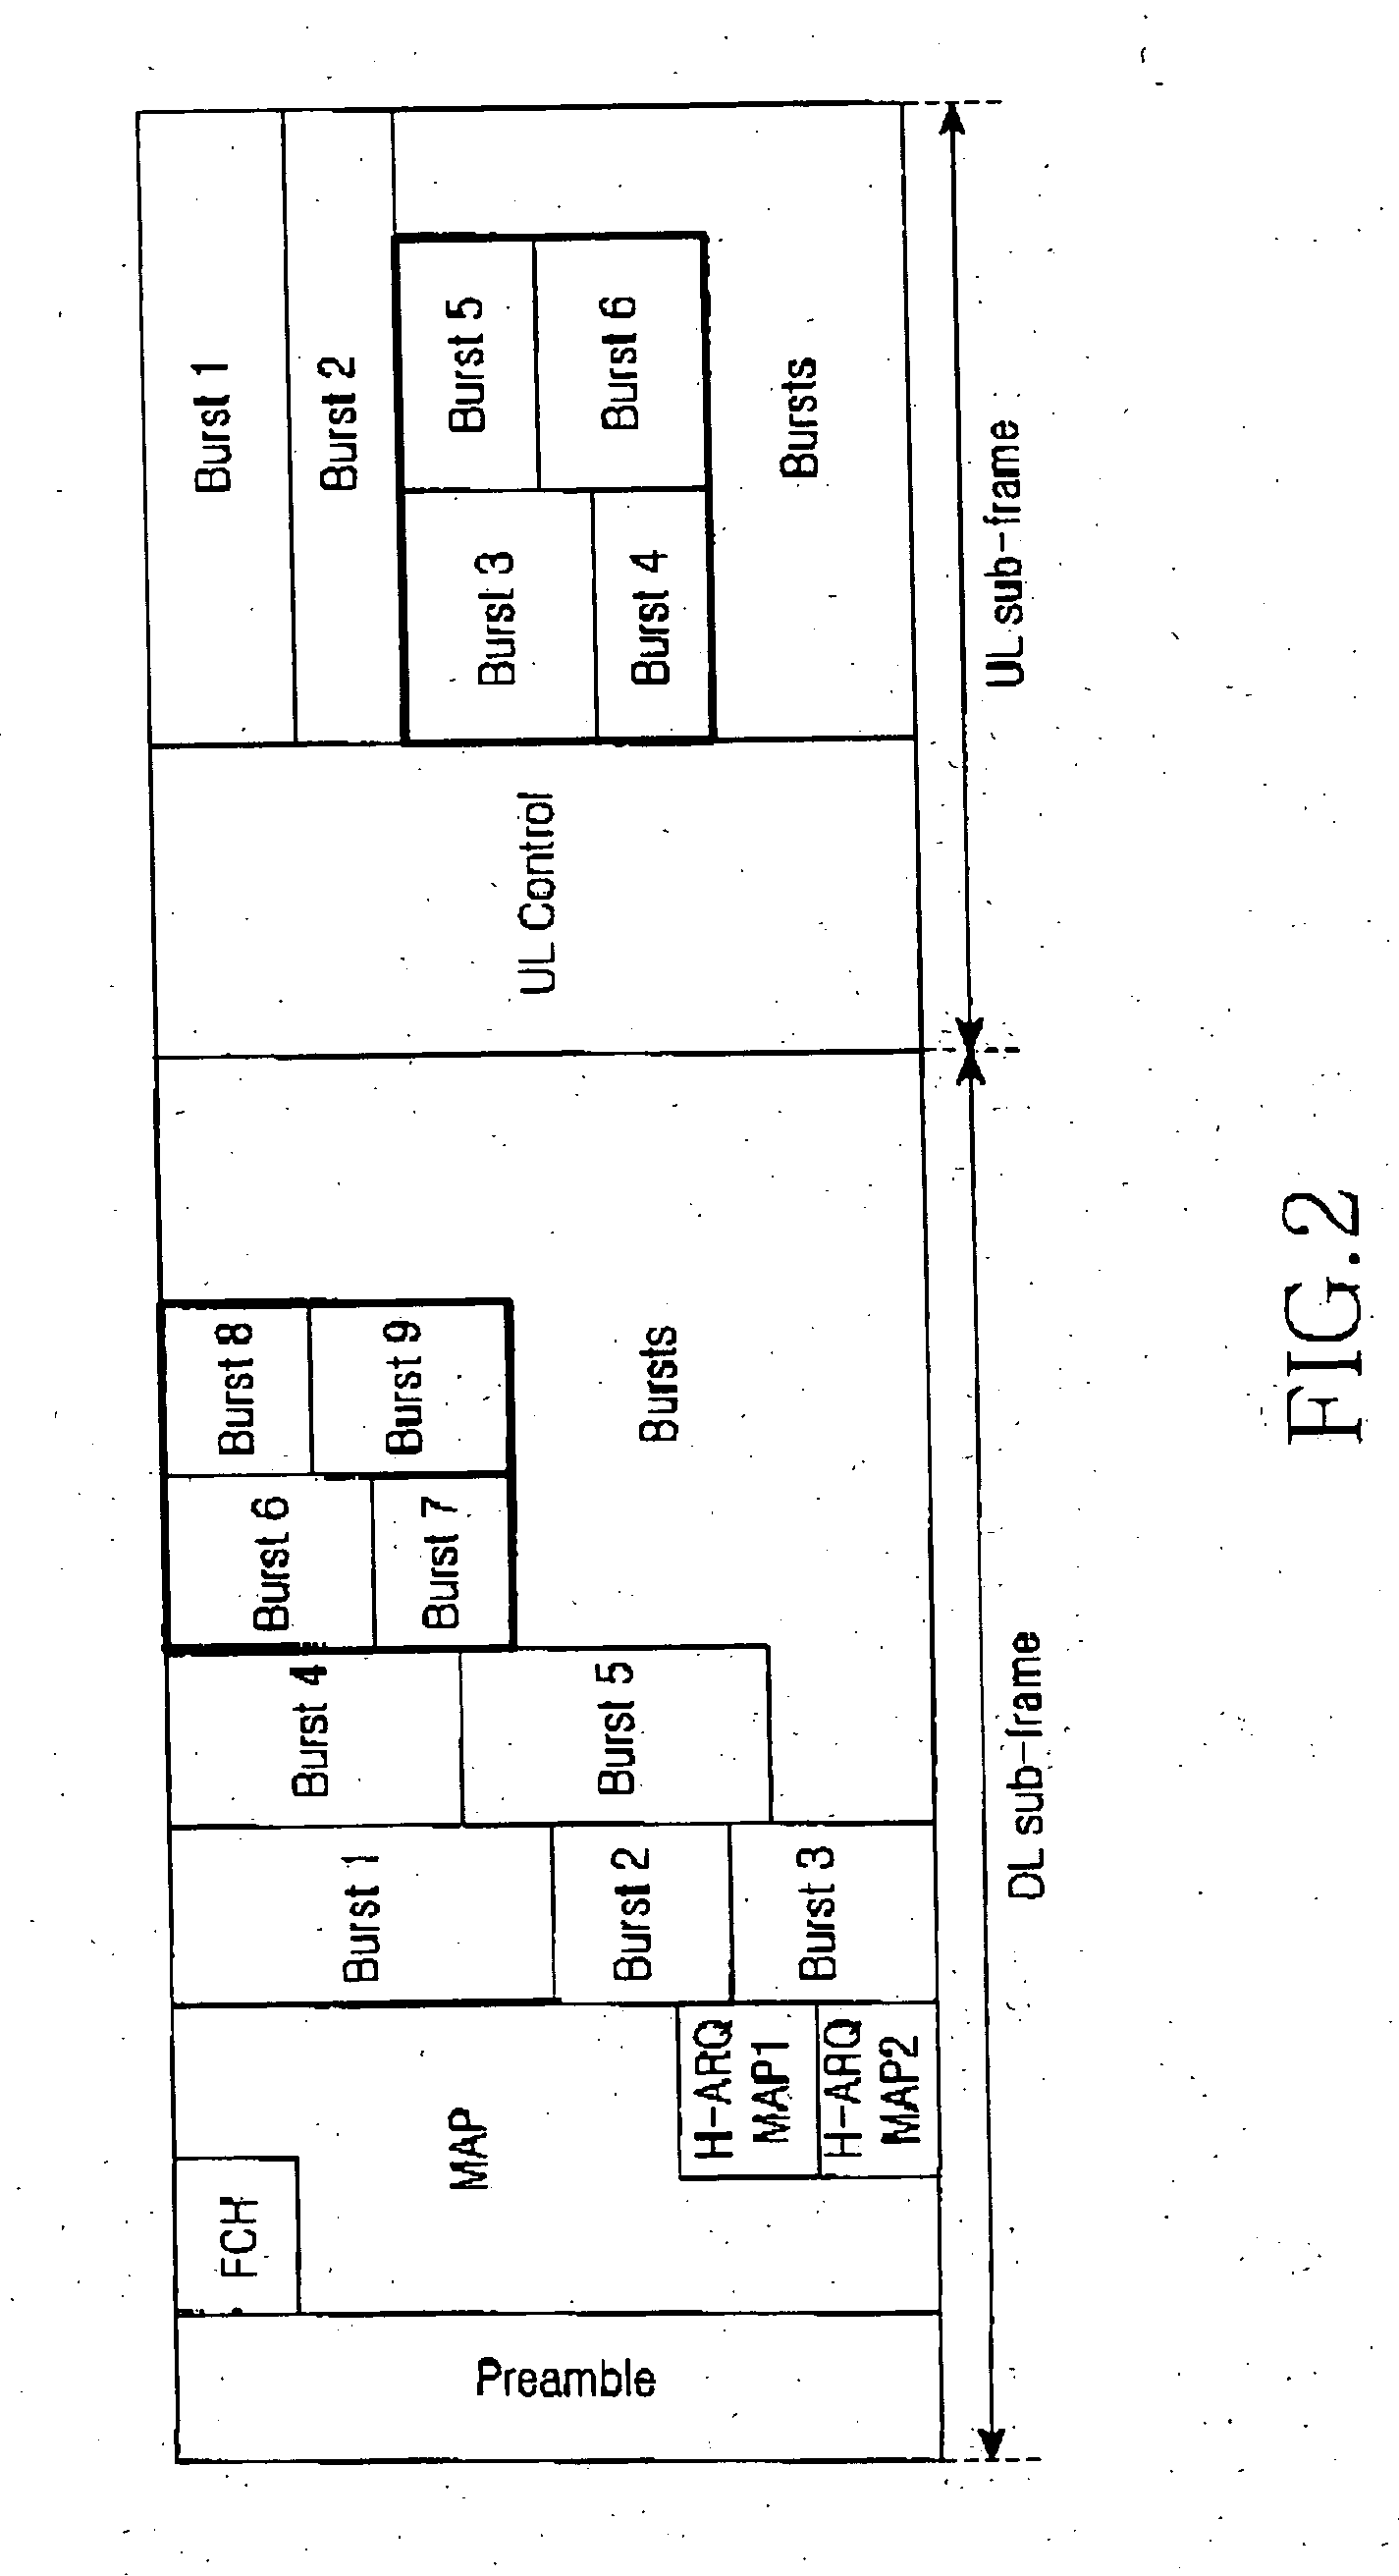 Method and system for indicating data burst allocation in a wireless communication system